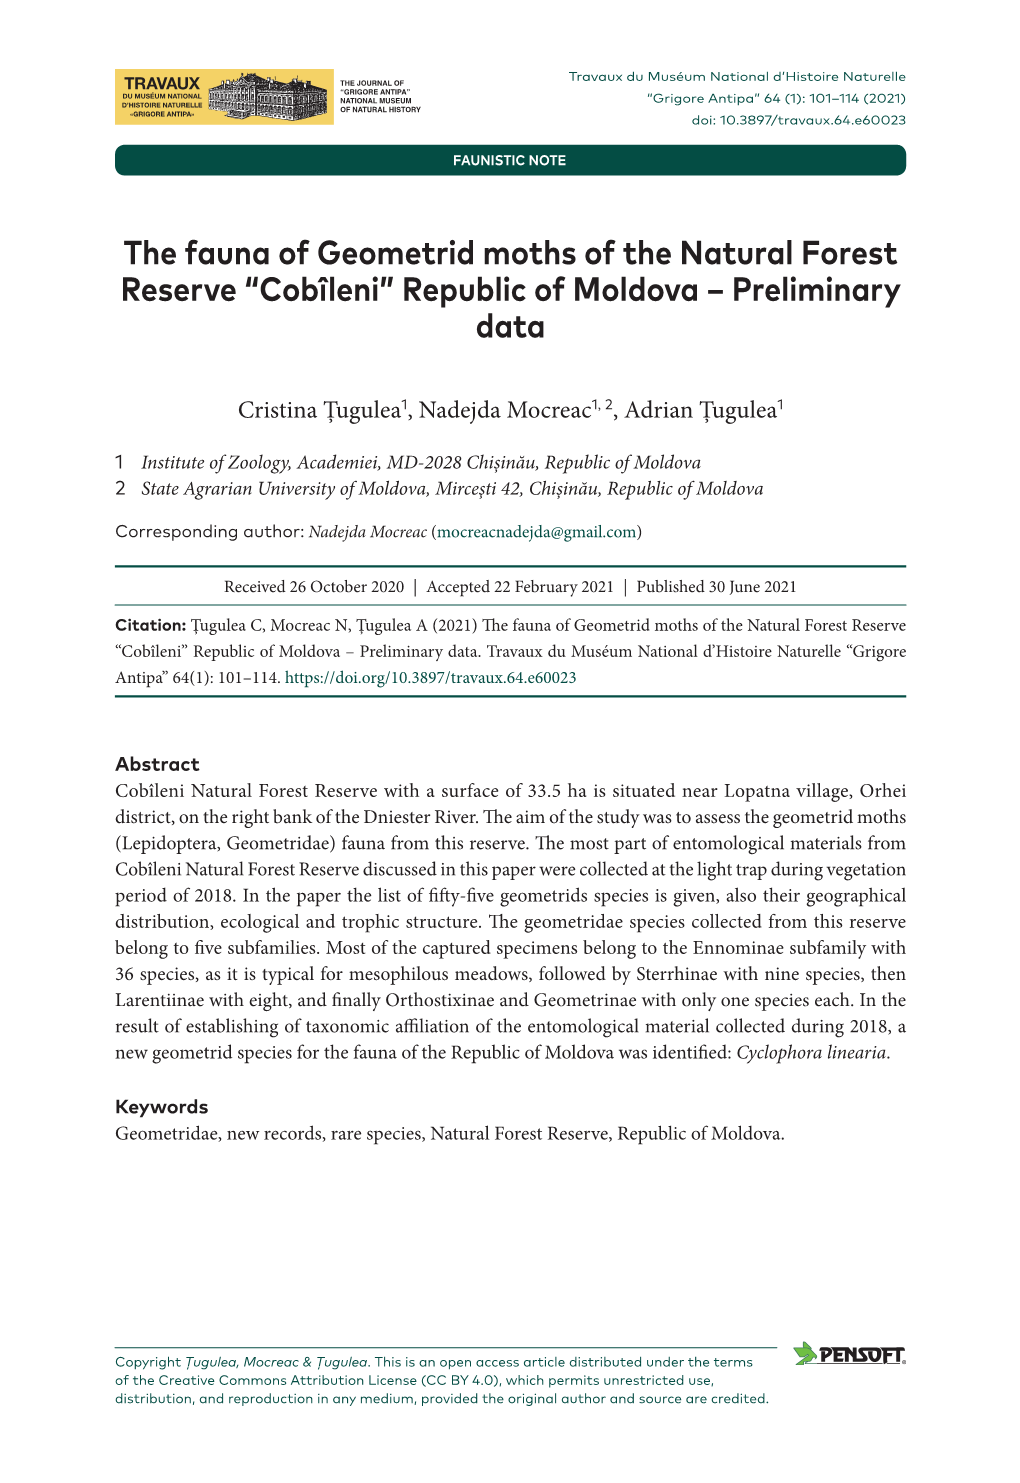 The Fauna of Geometrid Moths of the Natural Forest Reserve “Cobîleni” Republic of Moldova – Preliminary Data